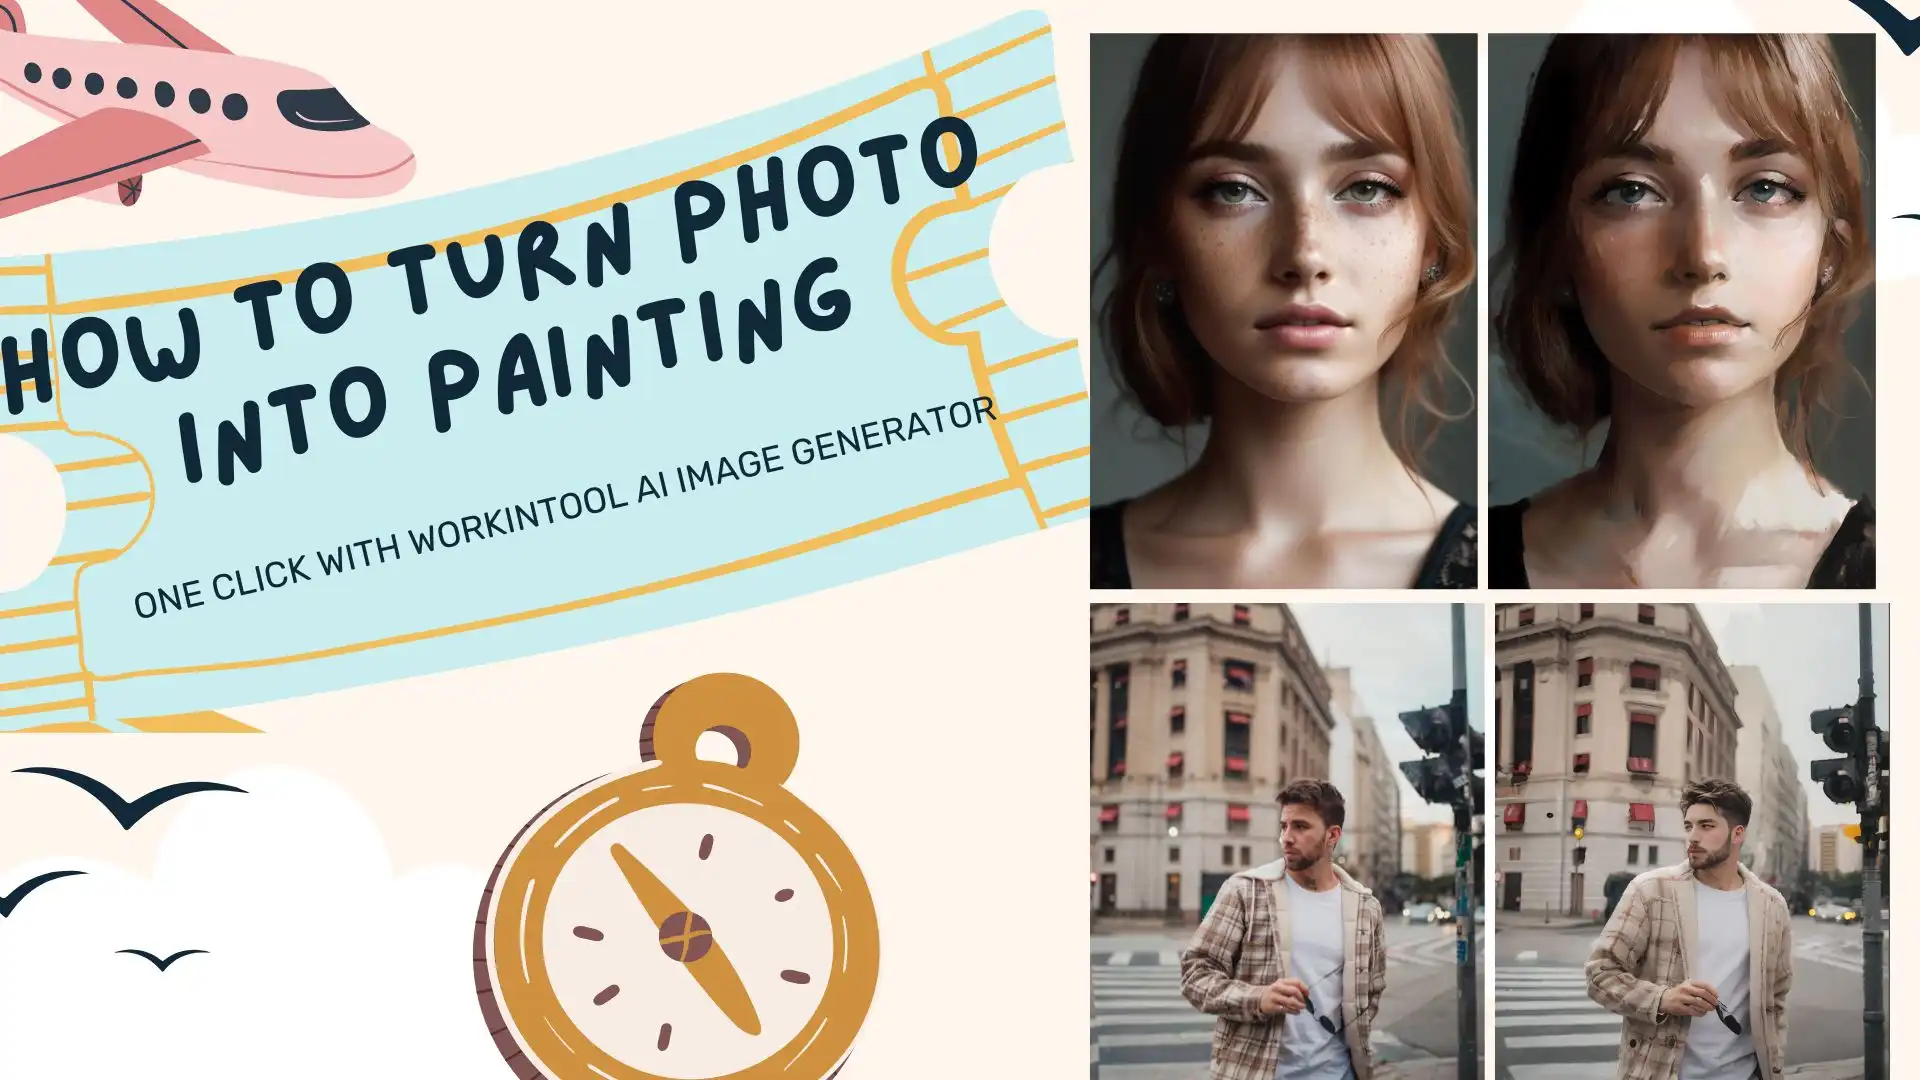 how to turn photo to painting poster